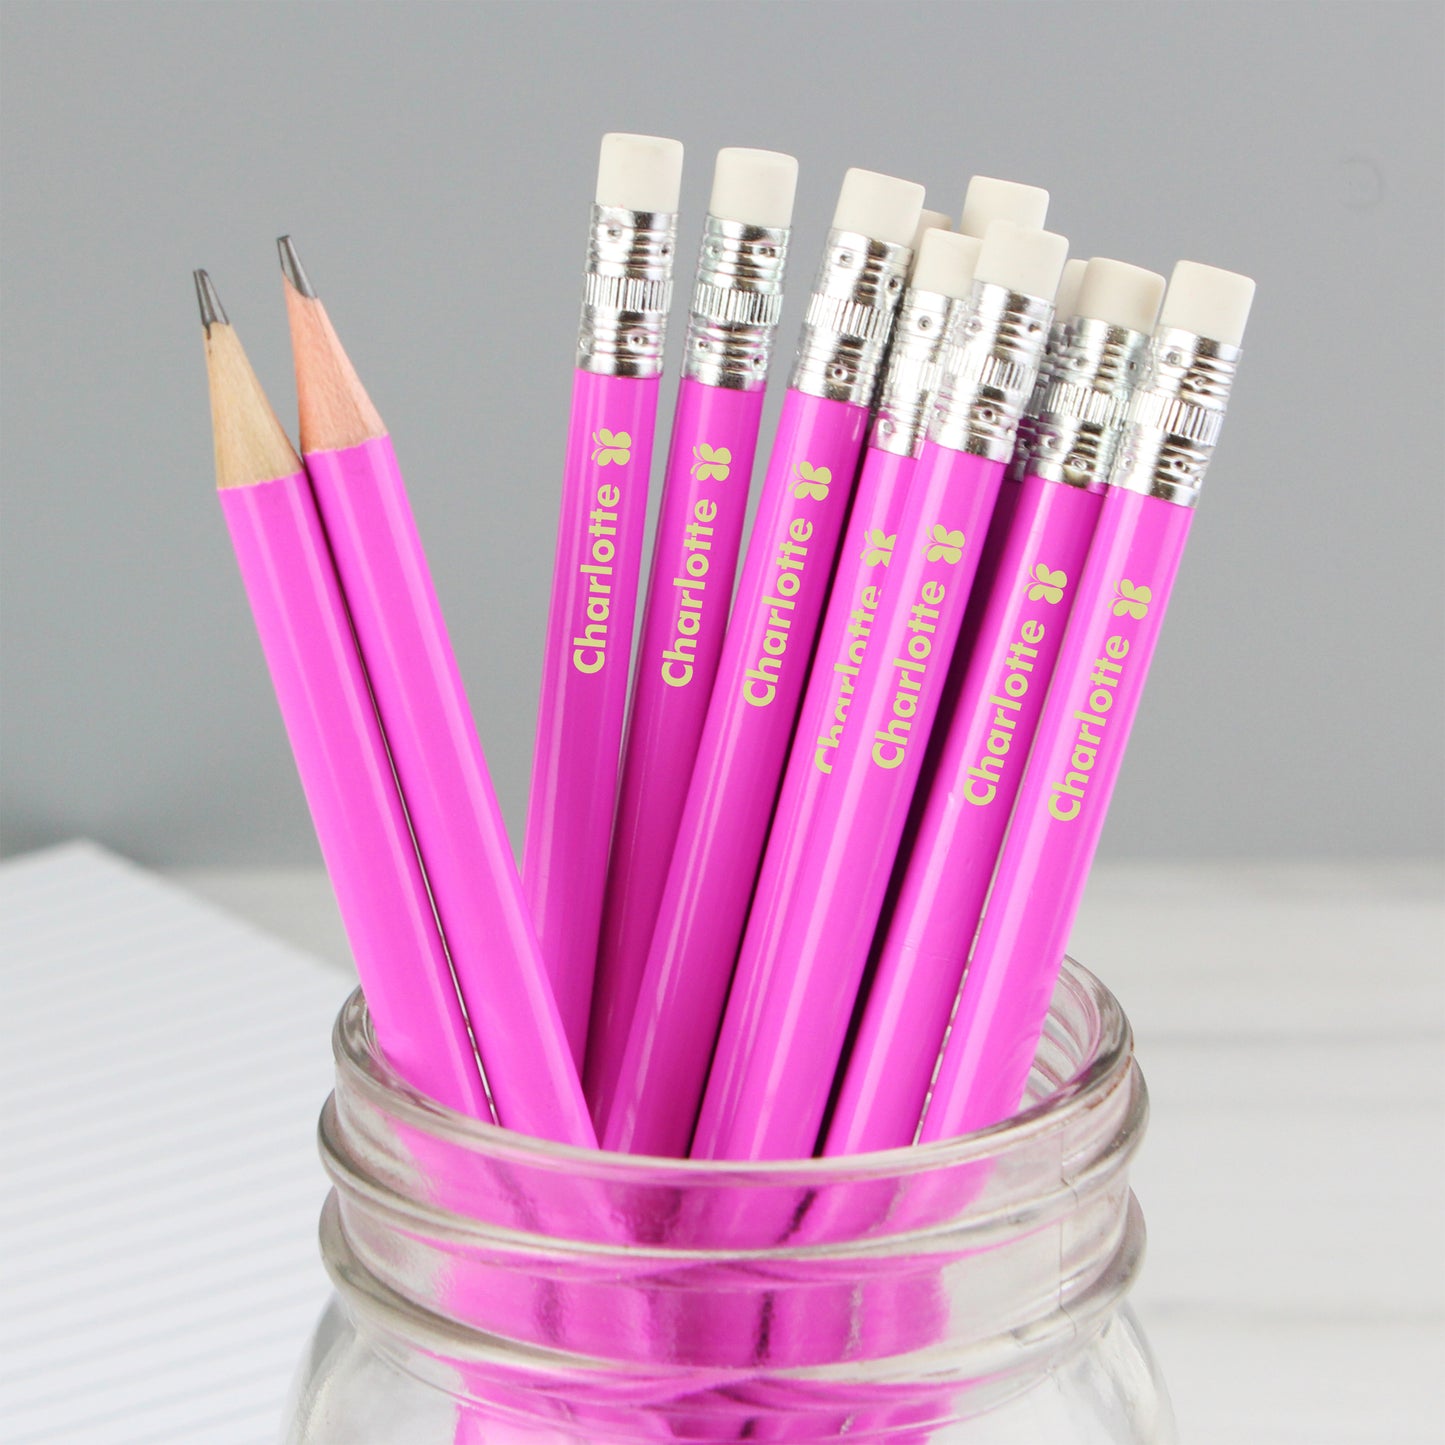 Personalised Butterfly Motif Pink Pencils - Personalise It!